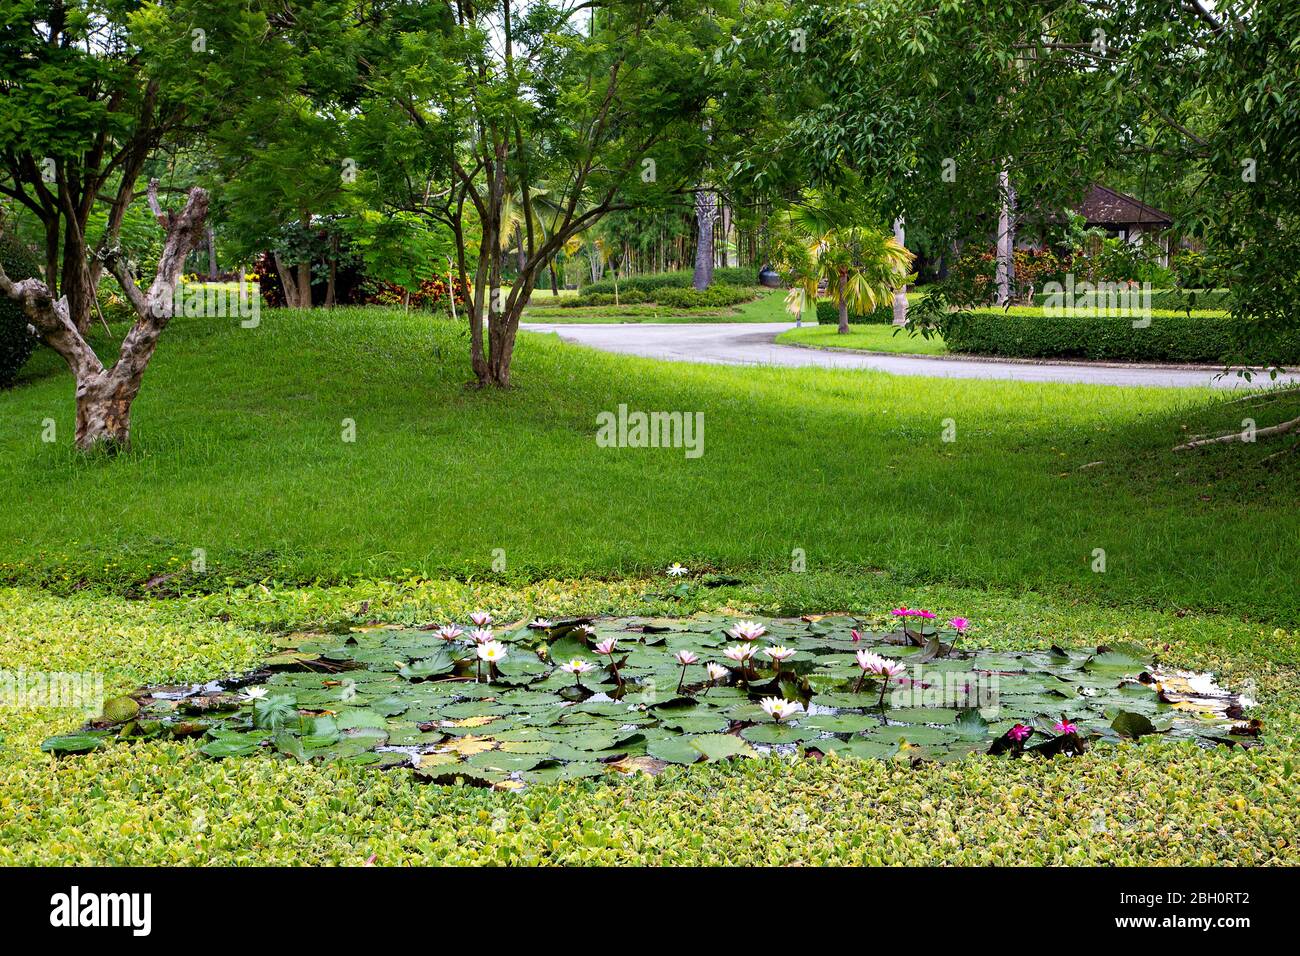 Pink and white water lilies in Chiang Mai, Thailand Stock Photo